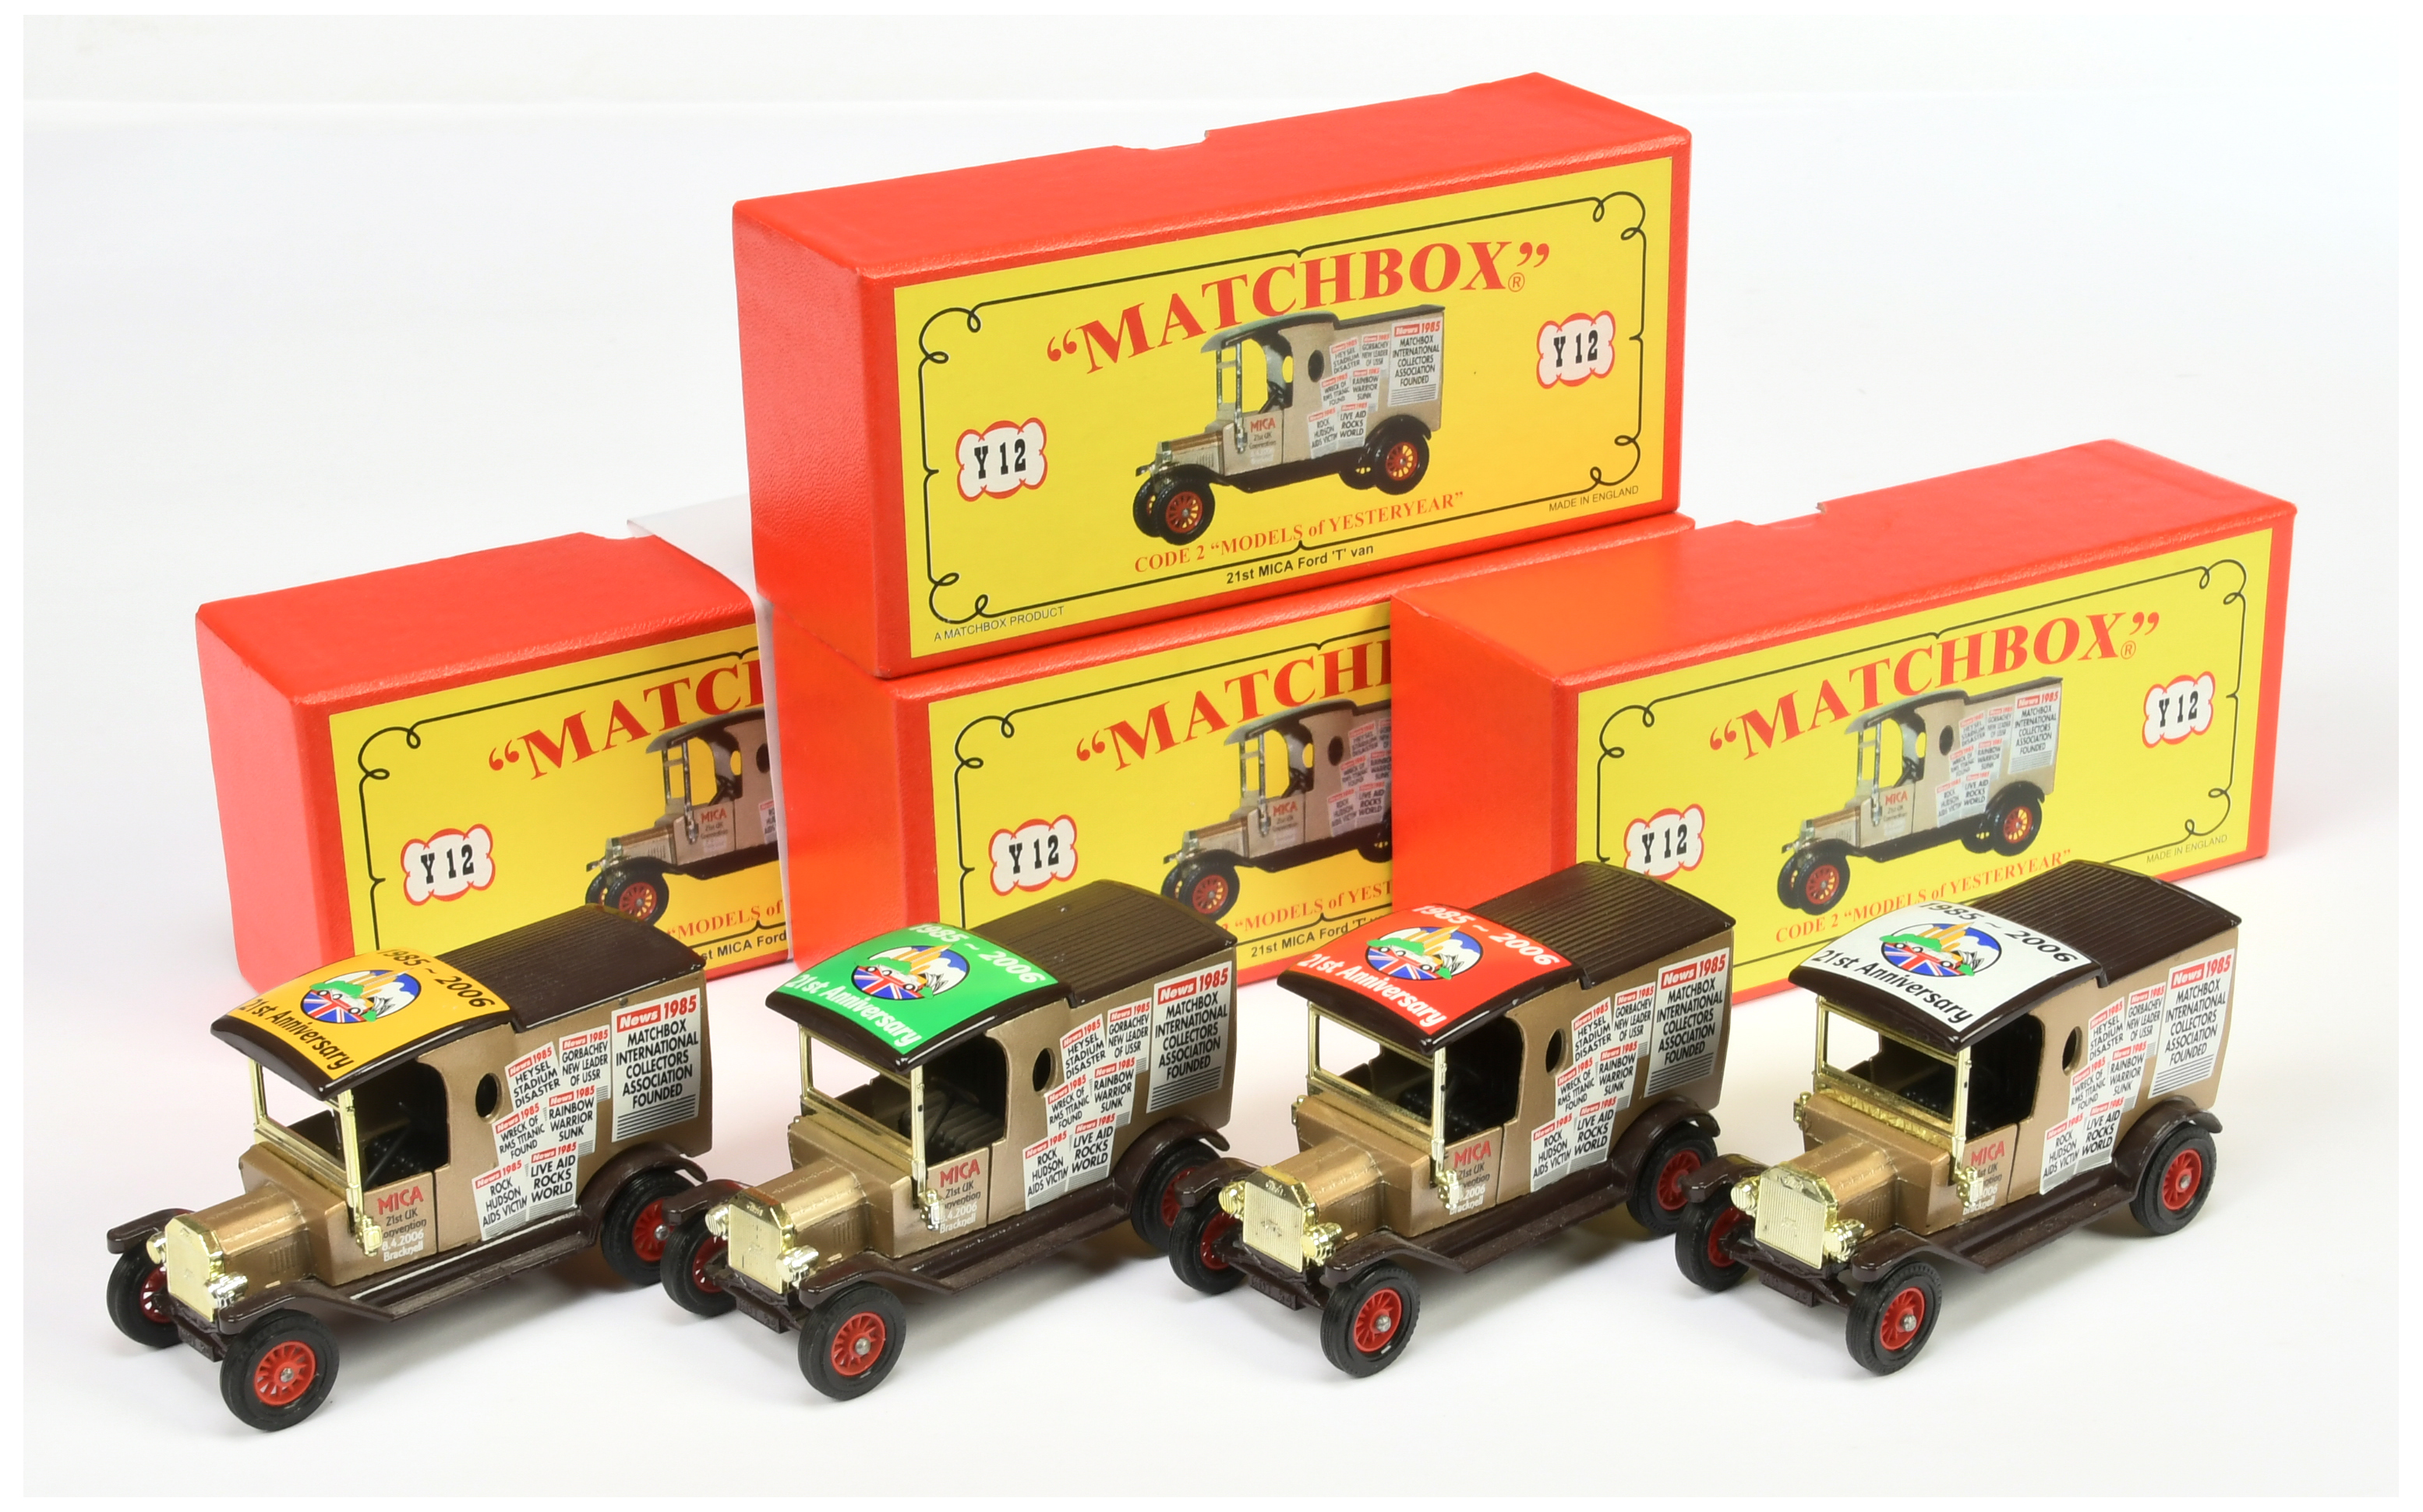 Matchbox Models of Yesteryear Code 2 issues "21st MICA" Ford Model T Van (1) Y12 glossy brown bod...